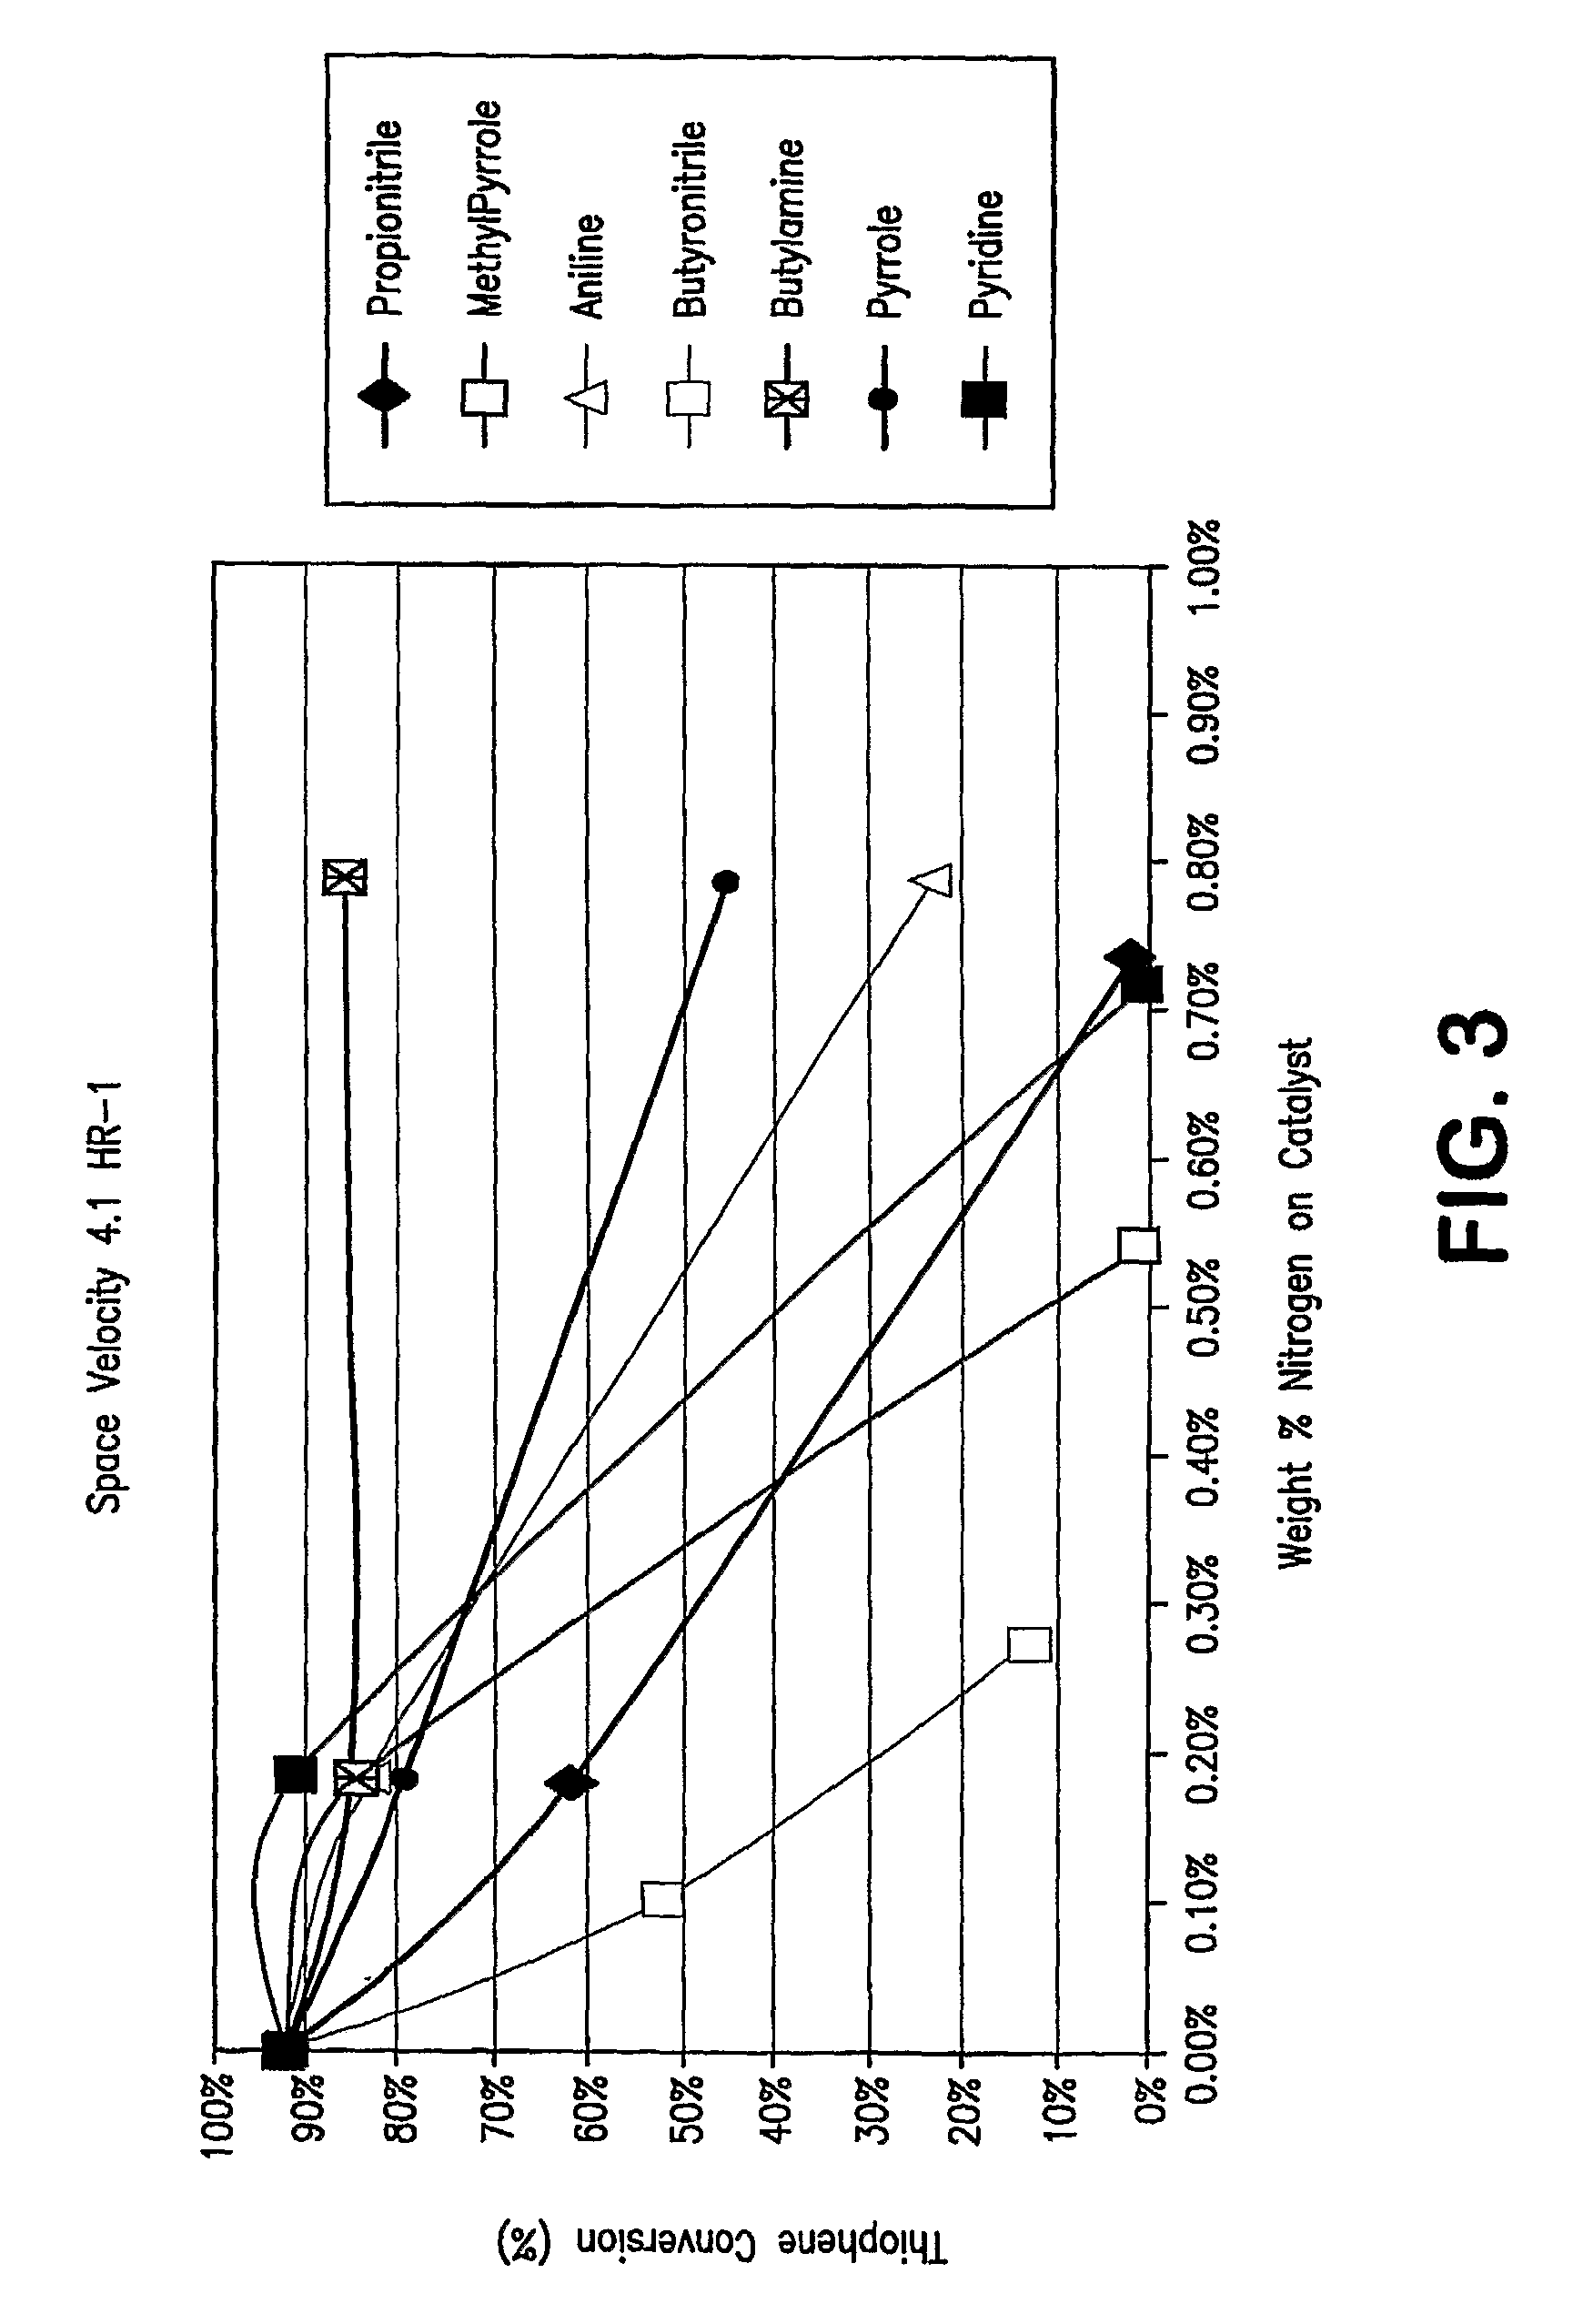 Process For Removal Of Sulfur From Components For Blending Of Transportation Fuels